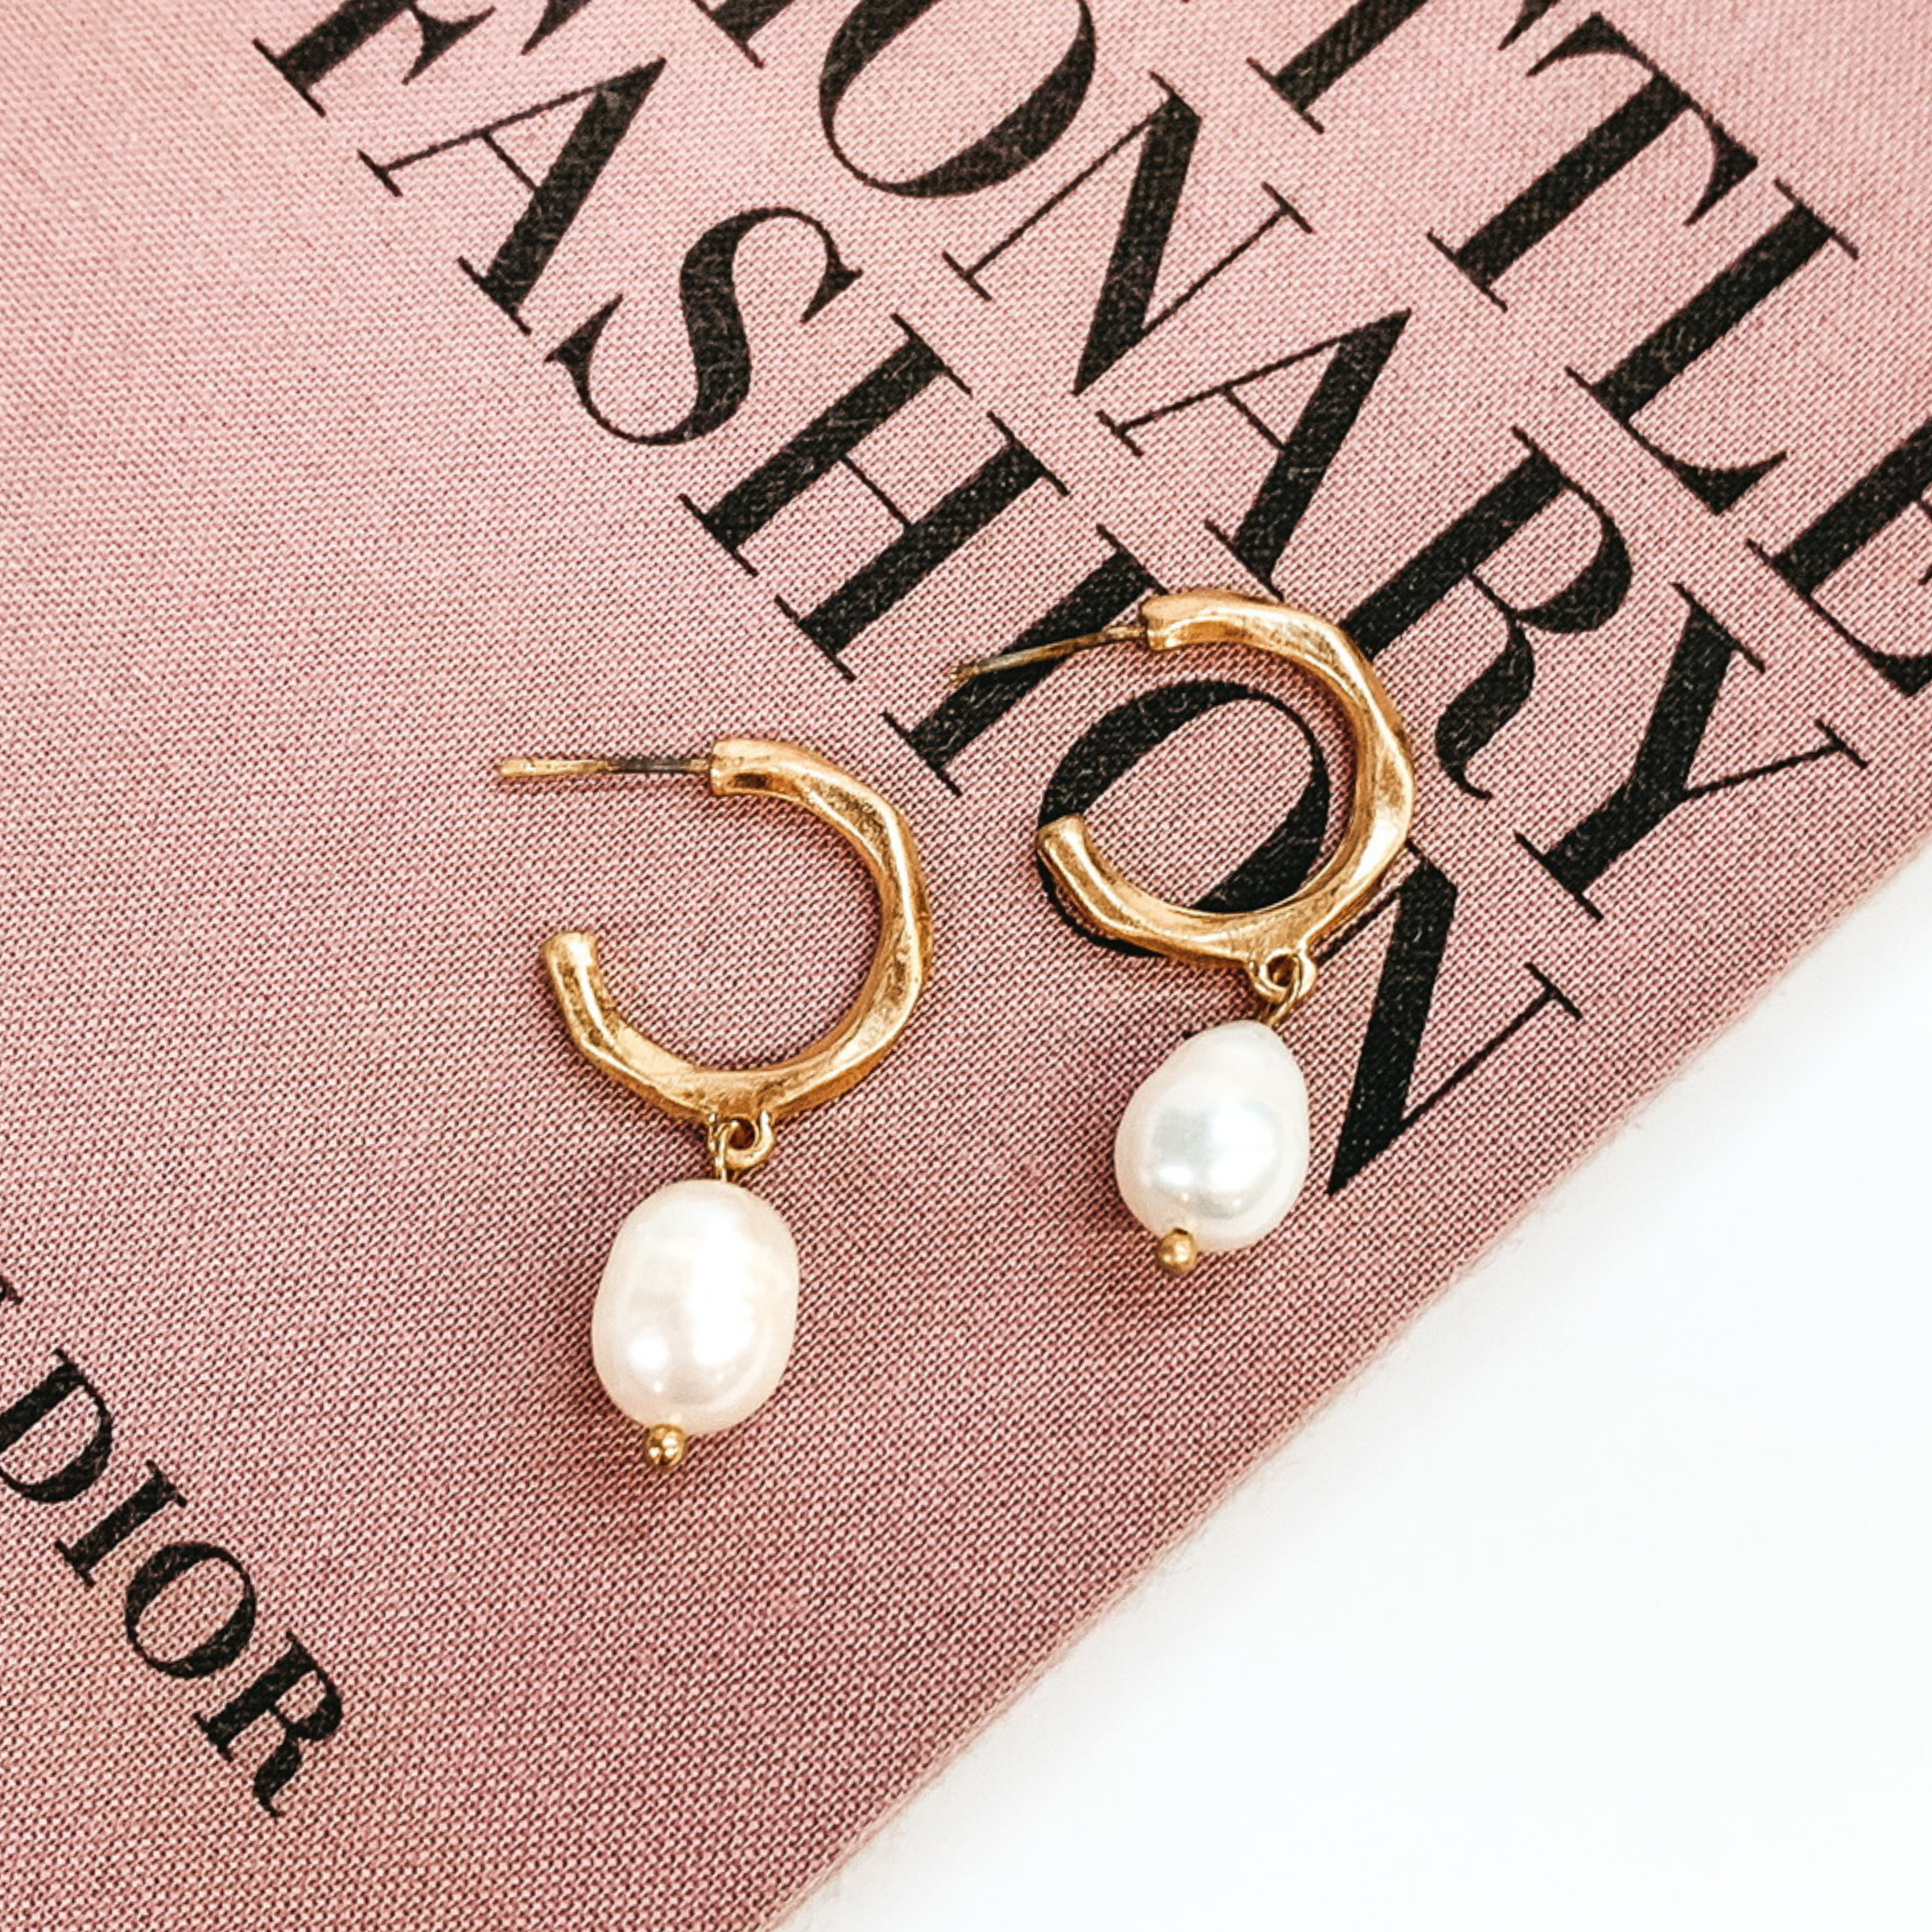 Special Occasion Hoop Earring with Pearl Dangle in Worn Gold Tone - Giddy Up Glamour Boutique